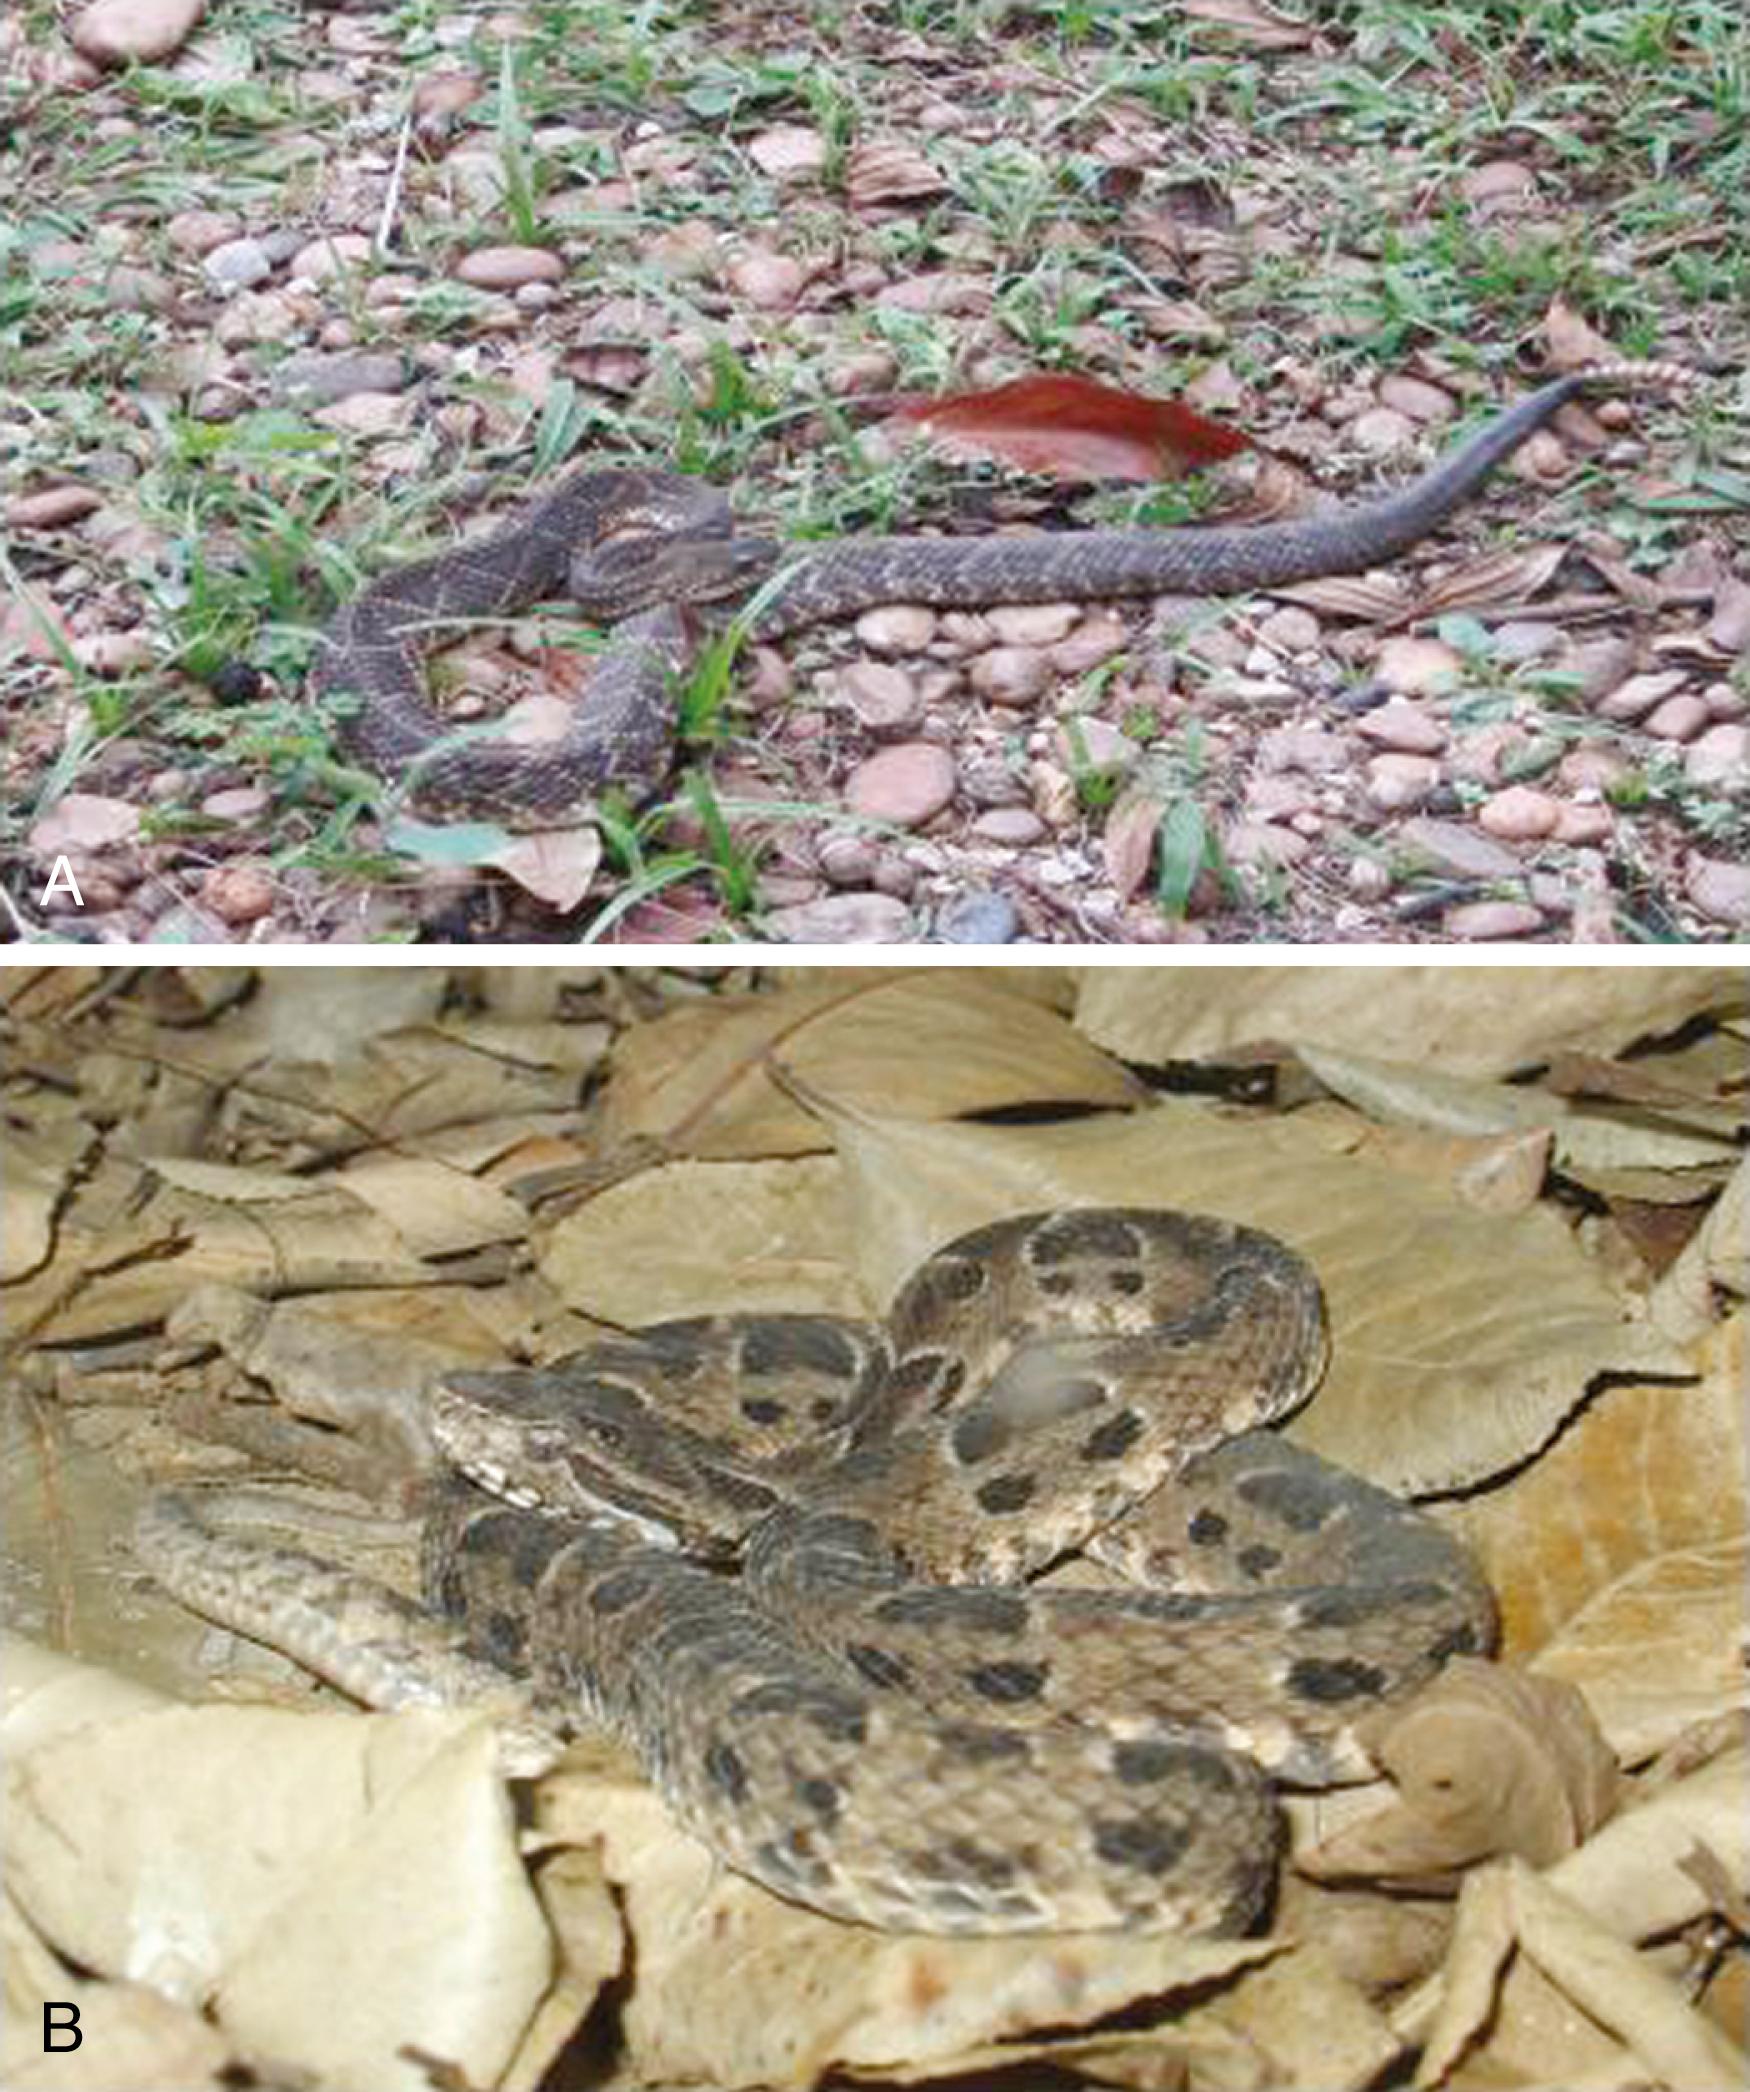 Fig. 52.3, A, Crotalus durissus, the South American rattlesnake of the Viperidae family. The venom is mainly neurotoxic, but it can cause skin necrosis. B, The jararacas ( Bothrops genus) can provoke extremely severe necrosis of the skin and deep structures in humans, as observed in other snakes of the Viperidae family. This snake is a spotted jararaca (Bothrops matogrossensis) .